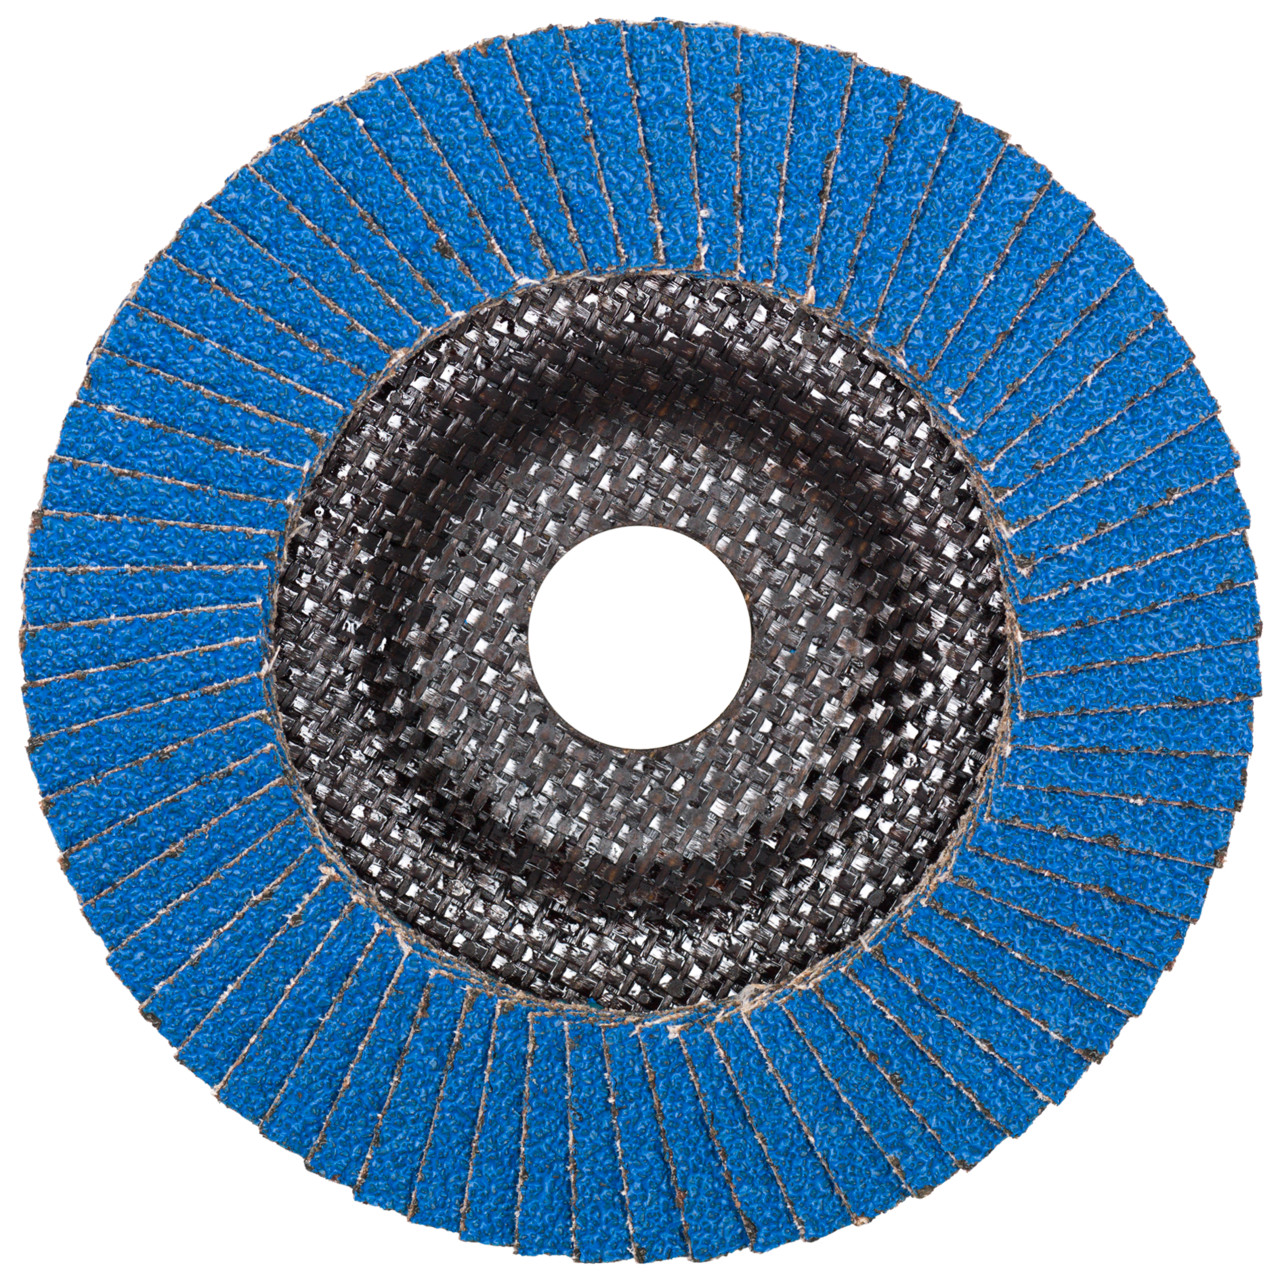 Tyrolit Serrated lock washer DxH 150x22.23 FASTCUT for steel &amp; stainless steel, P40, shape: 28A - straight version (glass fibre carrier body version), Art. 34166364